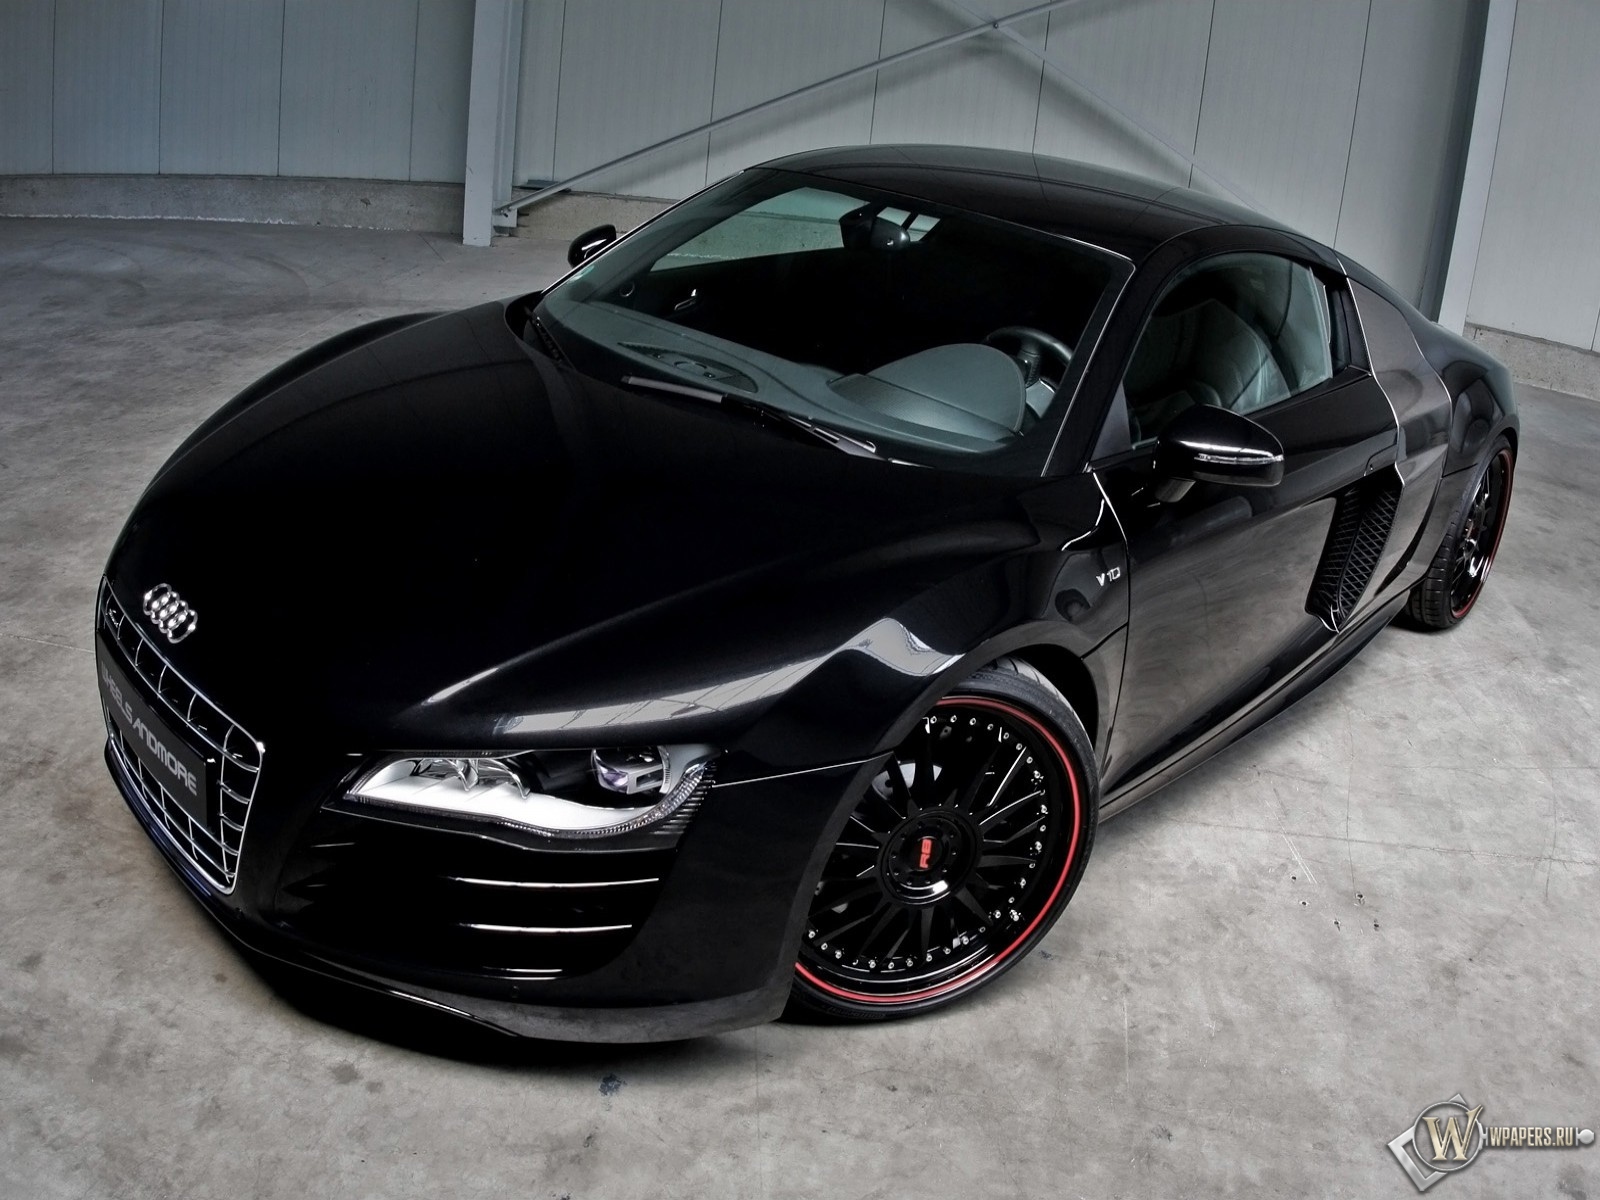 2011 Wheelsandmore Audi R8 V10 .6 - Front Angle Top 1600x1200